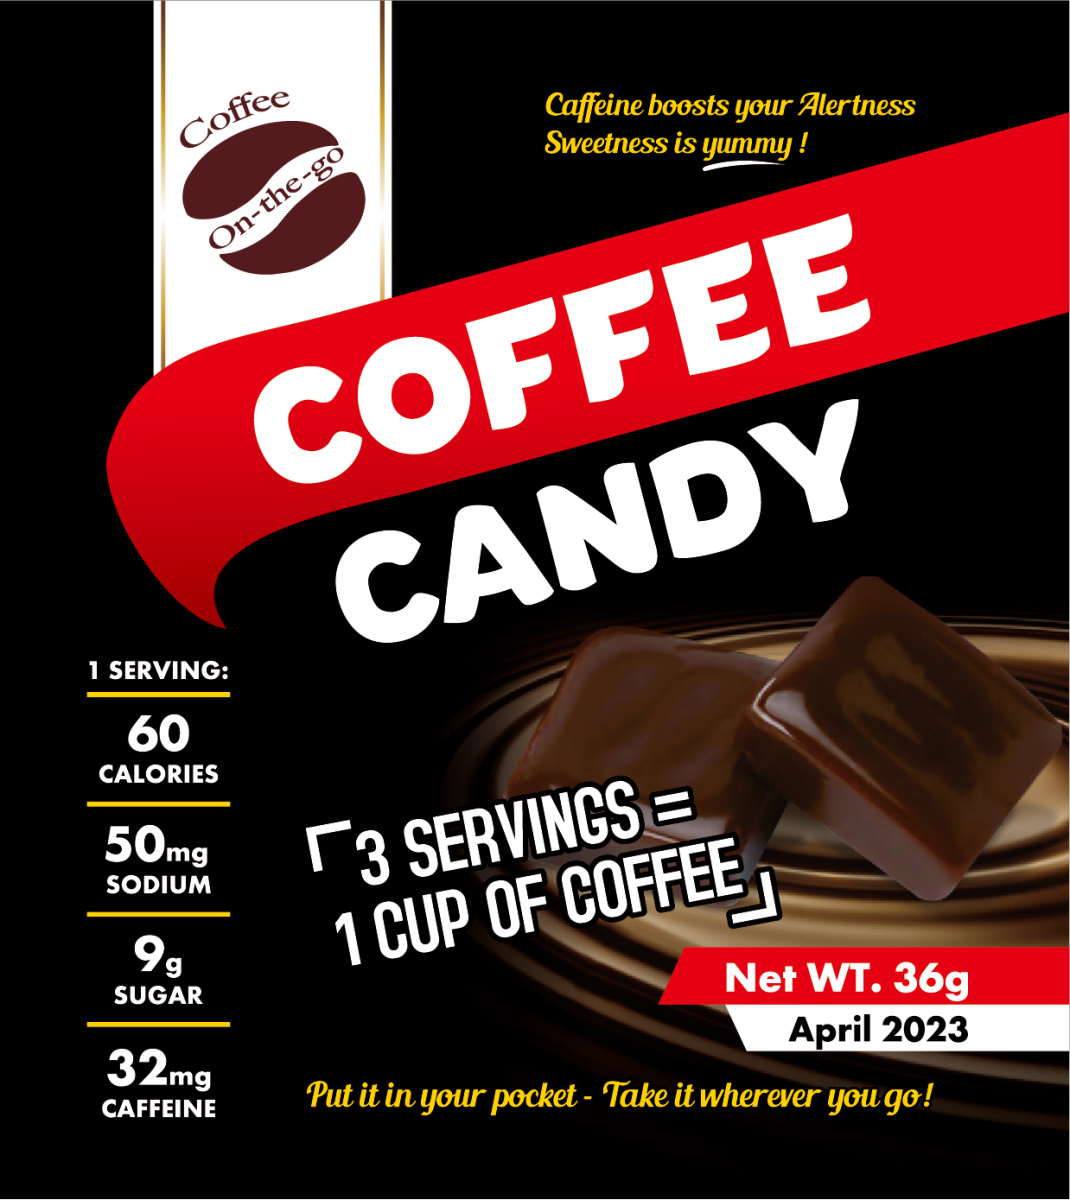 Students+can+win+up+to+%24500+in+CoffeeCandy+Raffle%26%23160%3B